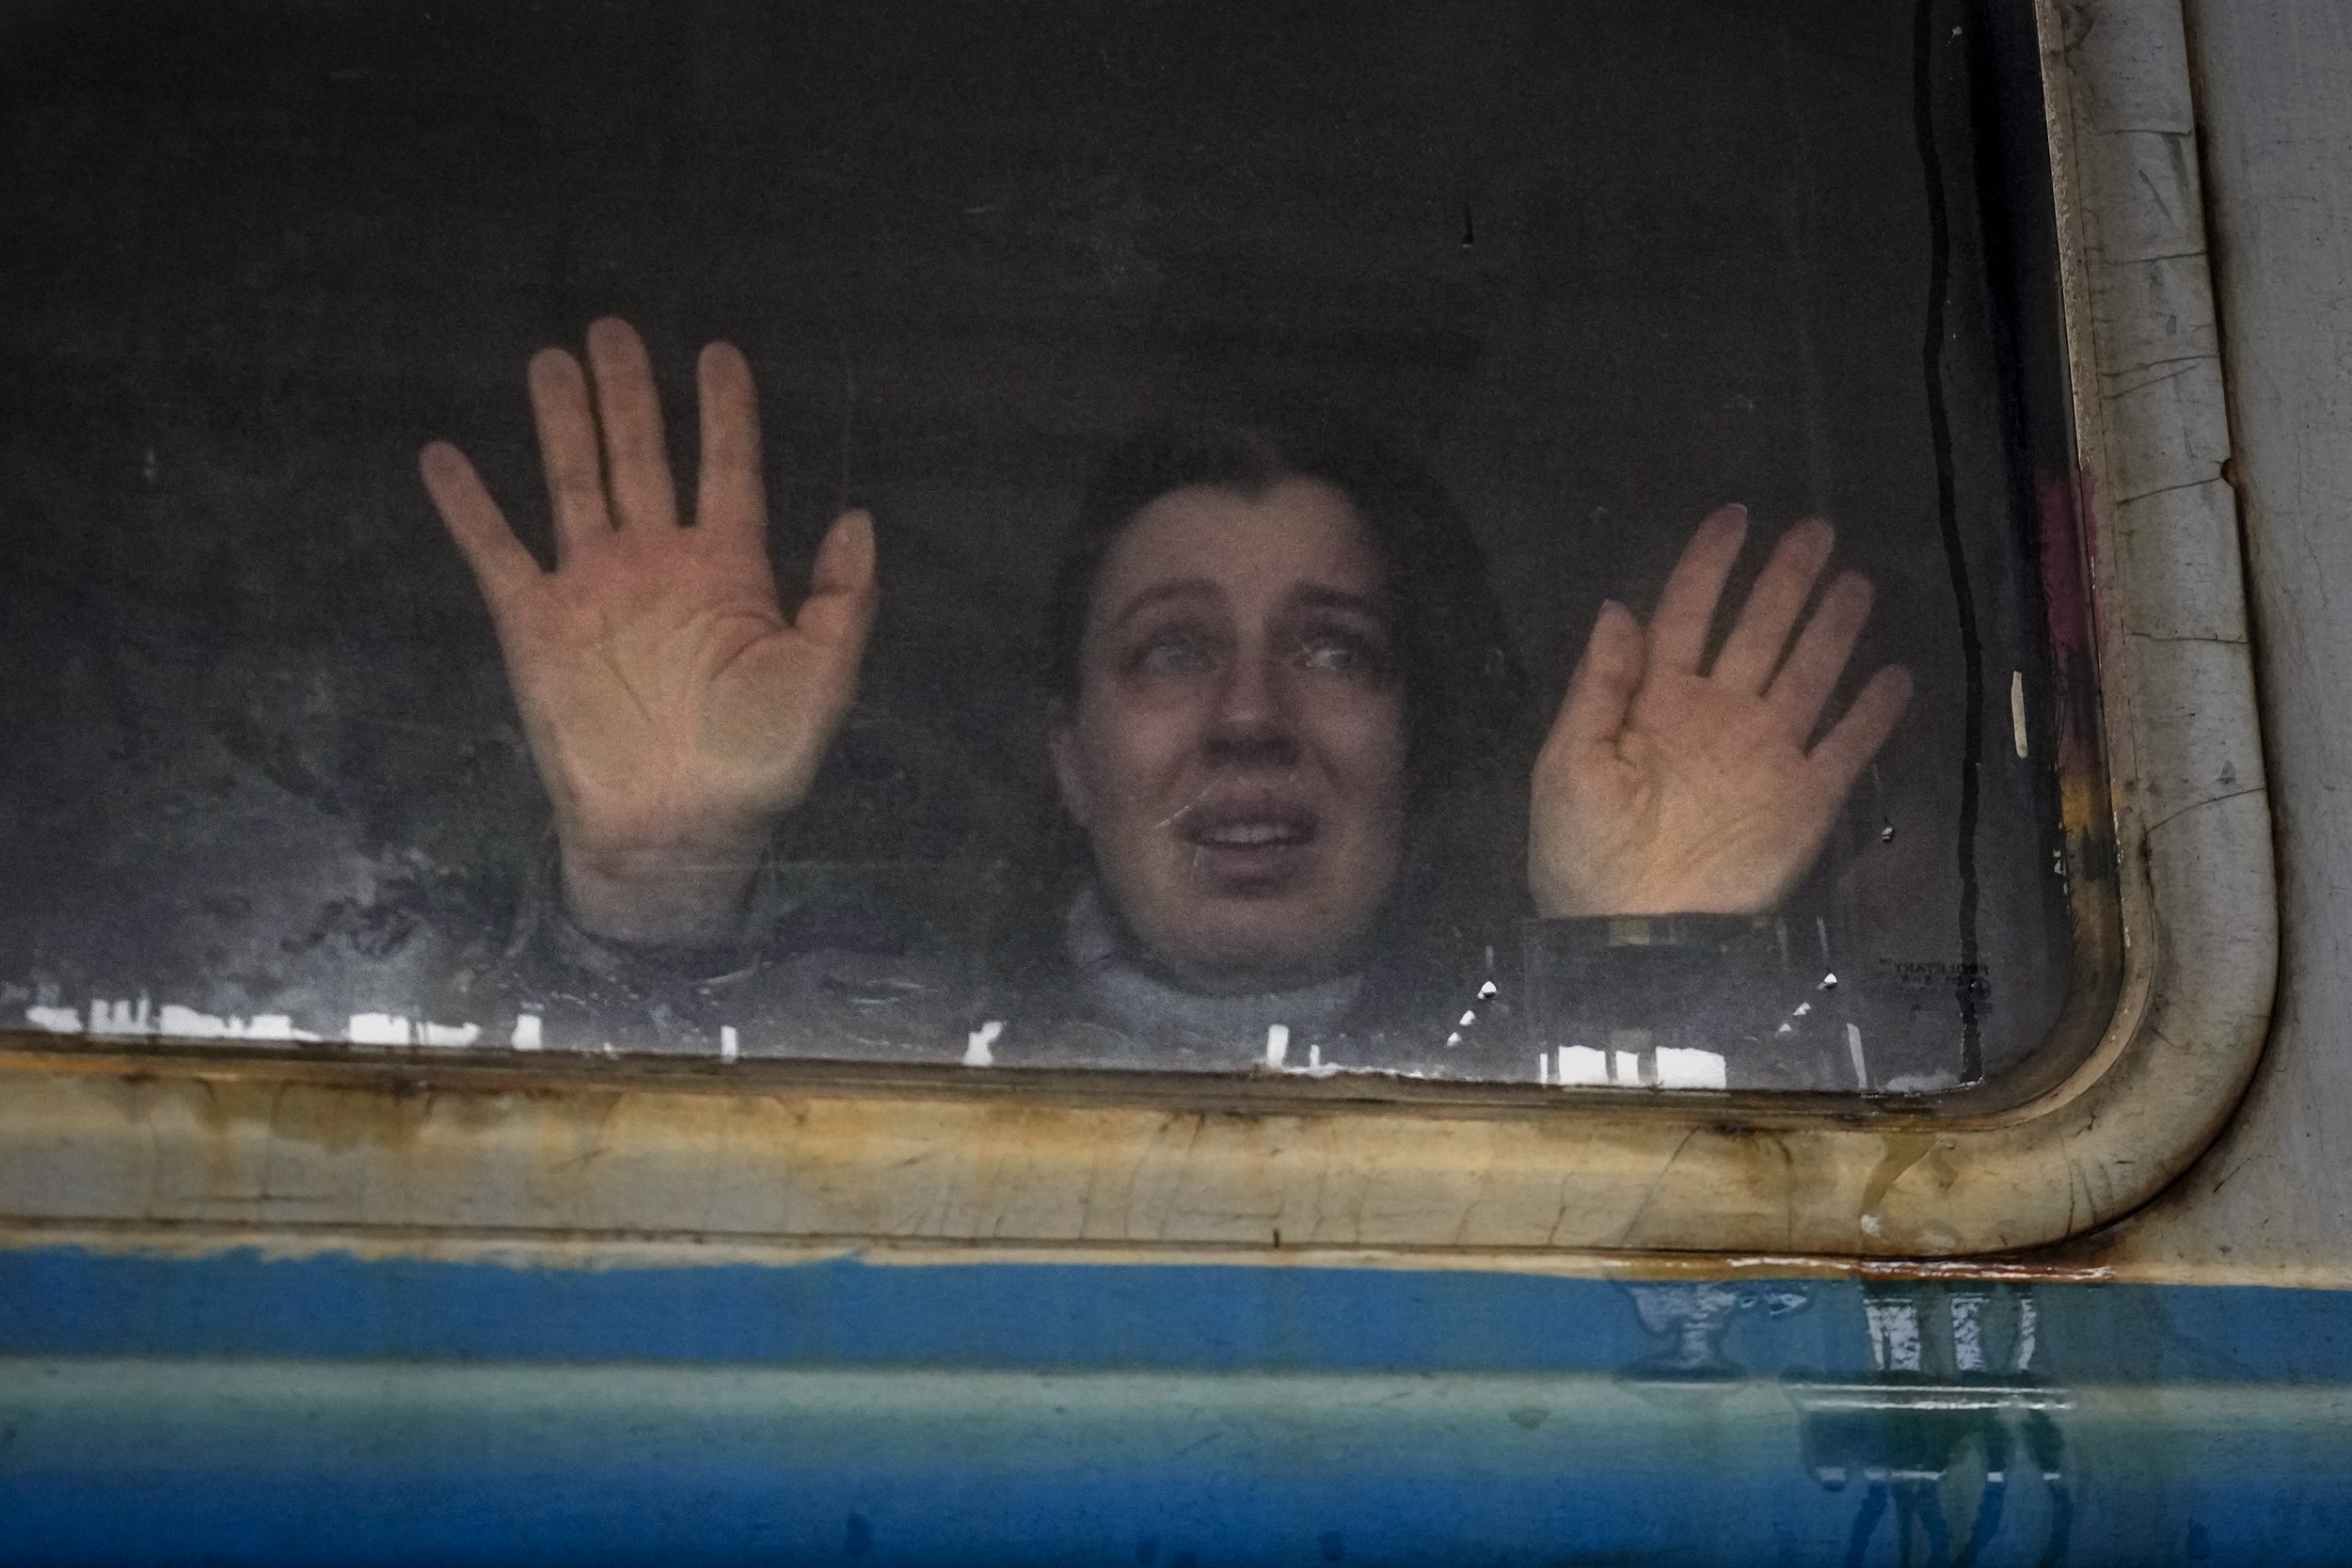  A woman looks toward relatives and presses her palms against a window of a Lviv bound train, on the platform in Kyiv, Ukraine, Thursday, March 3, 2022. (AP Photo/Vadim Ghirda) 